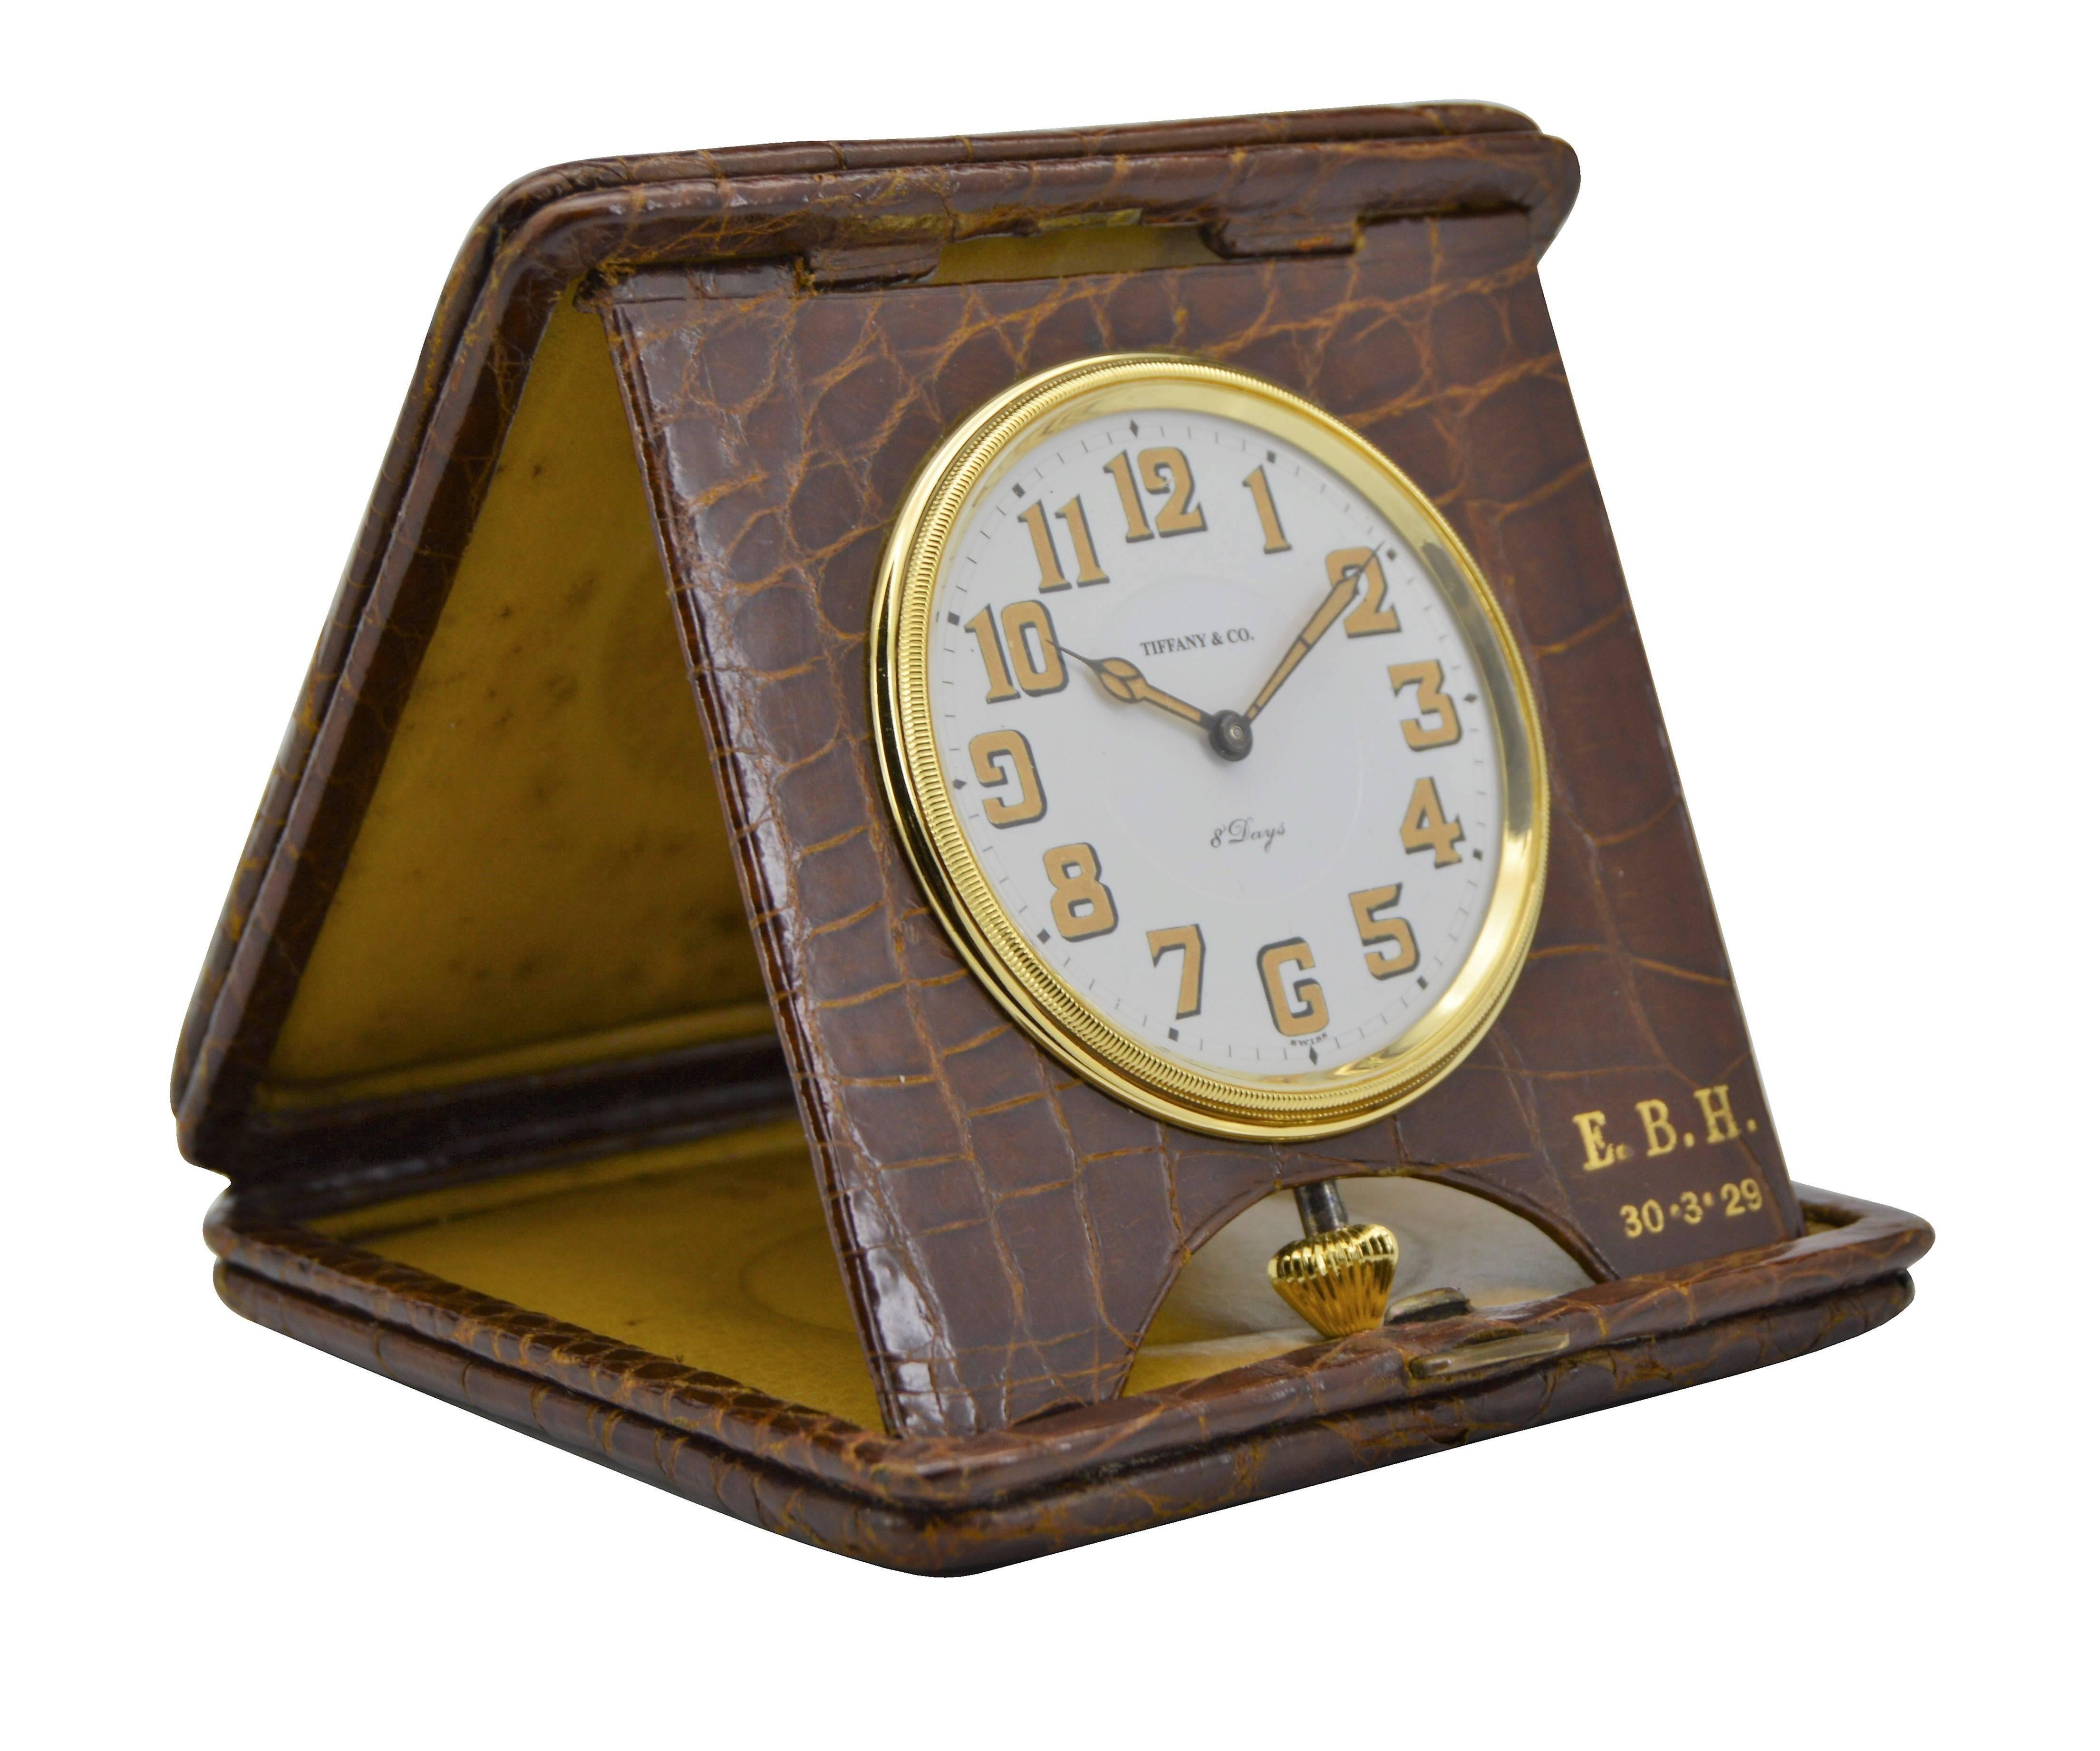 Art Deco Tiffany & Co. Elegant Reptilian Folding Desk Clock with Fired Dial from 1929 For Sale